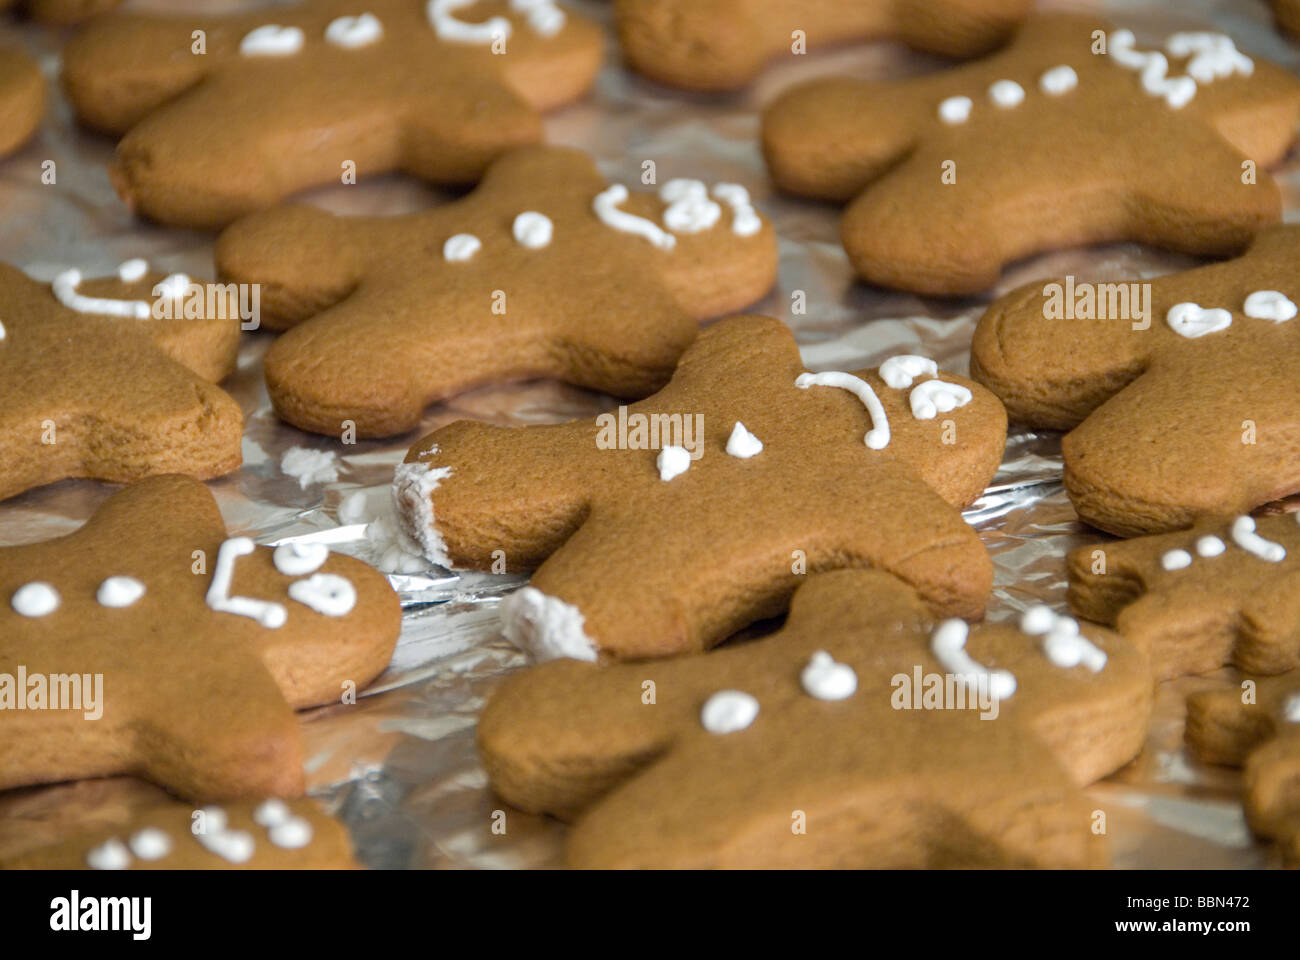 A frightened gingerbread man cookie lays on foil. Stock Photo